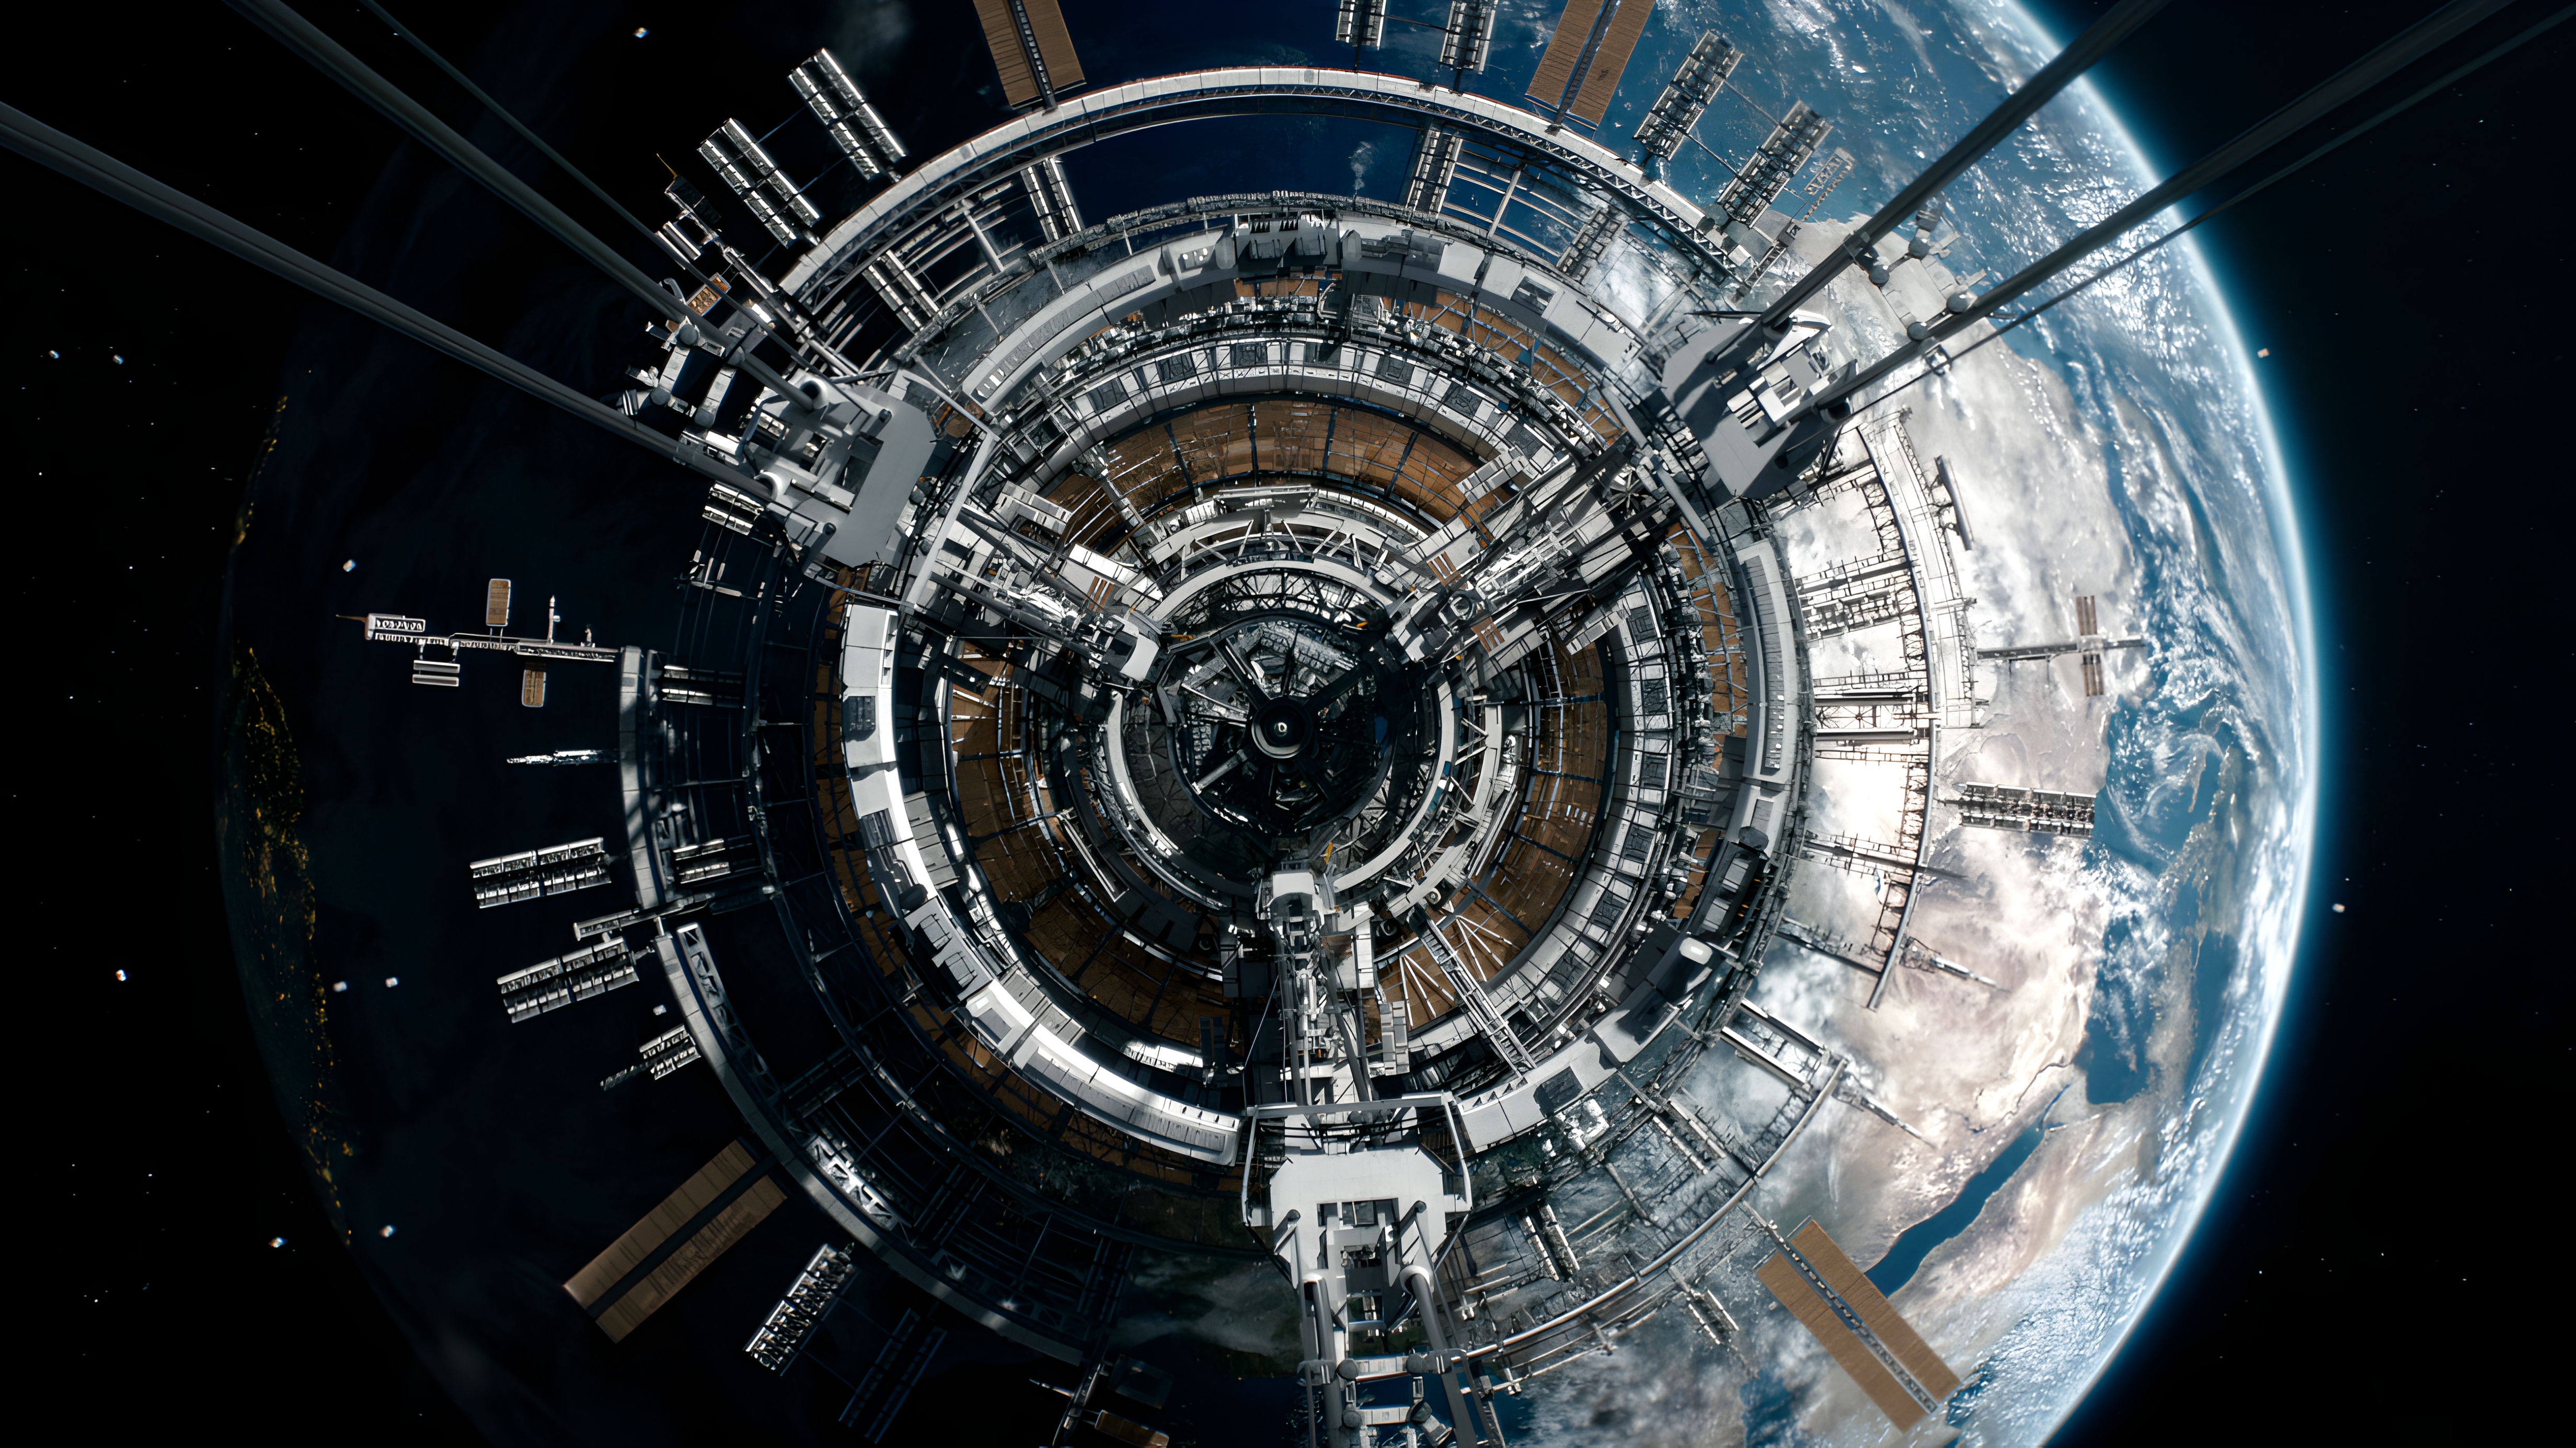 The Wandering Earth 2 Space Elevator Movies Space Futuristic 4928x2771